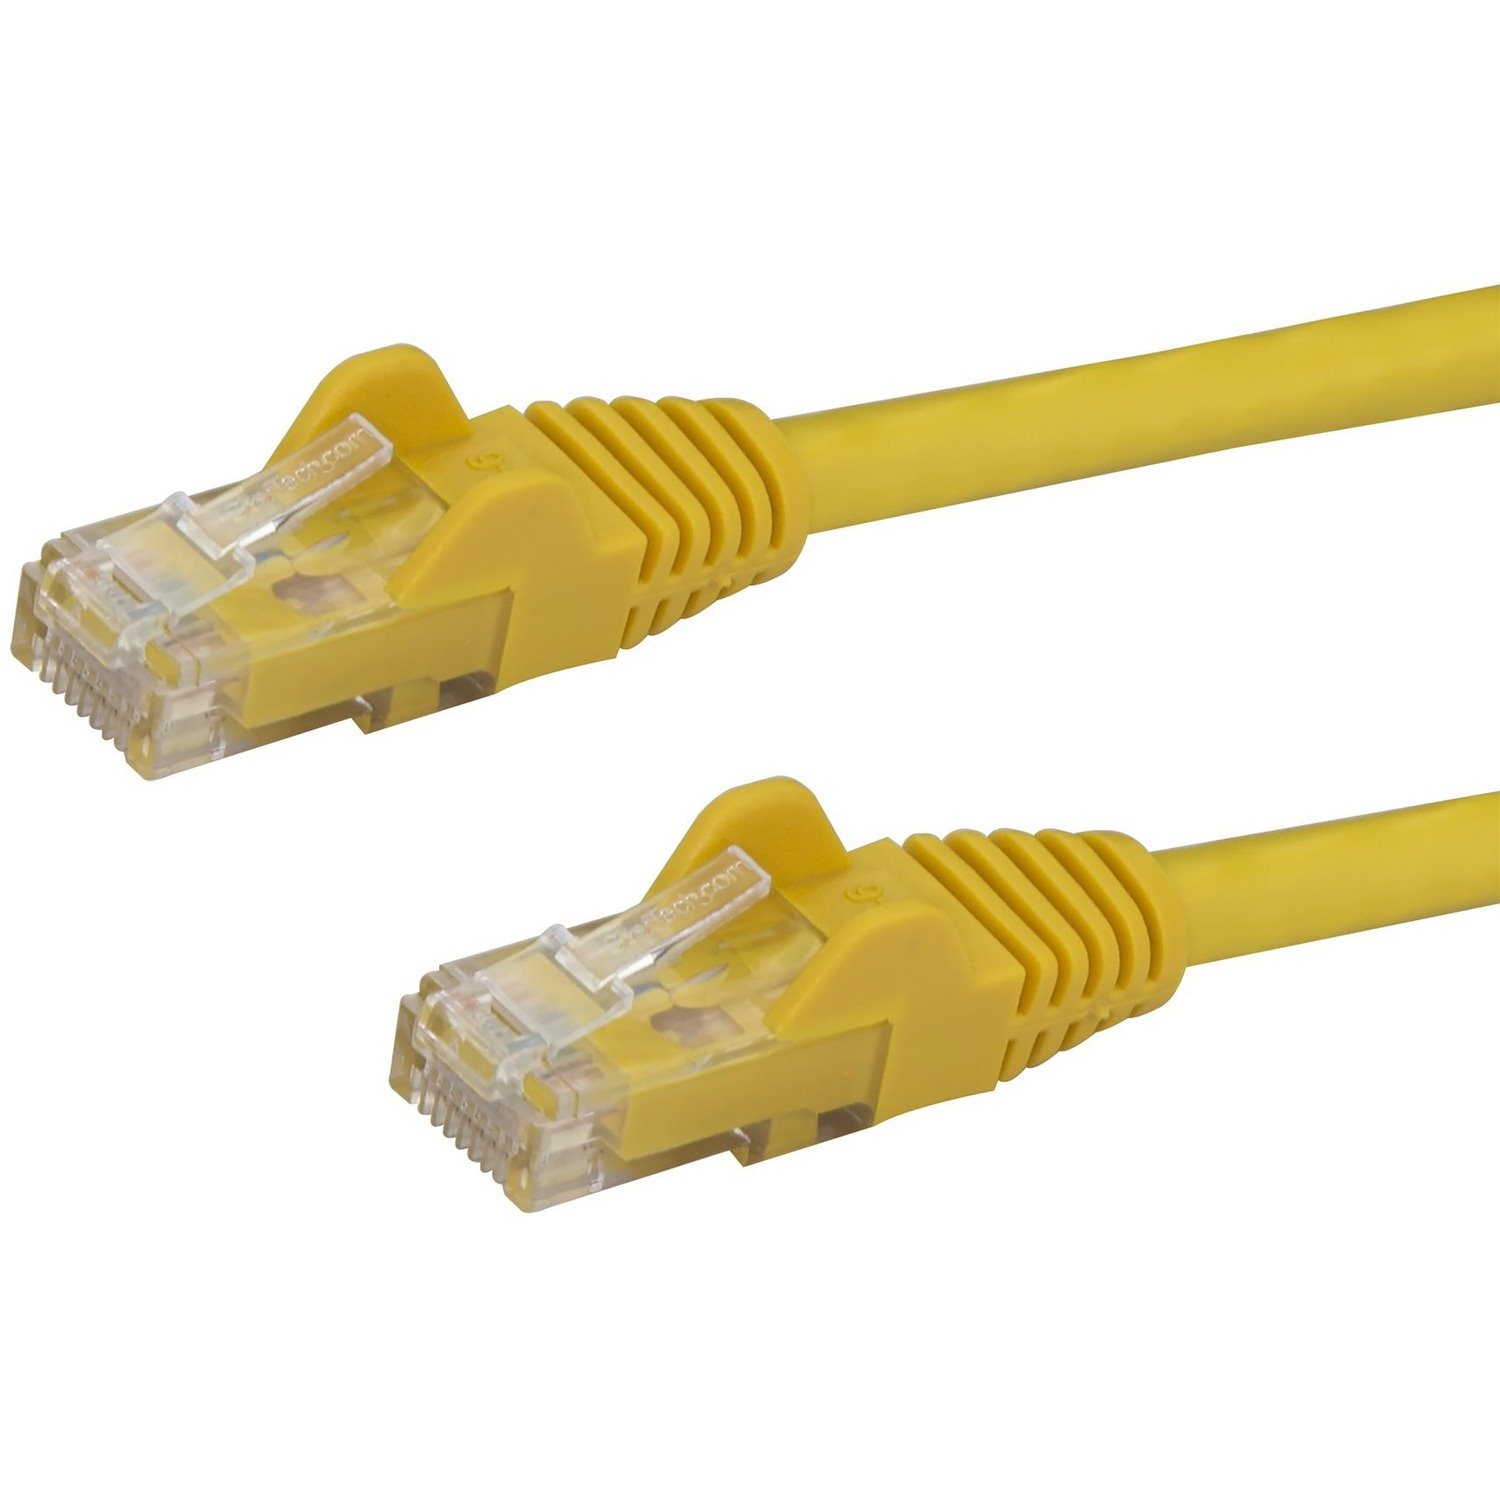 StarTech.com 10 m Category 6 Network Cable for Network Device, Hub, Wall Outlet, Distribution Panel, Workstation, IP Phone - 1